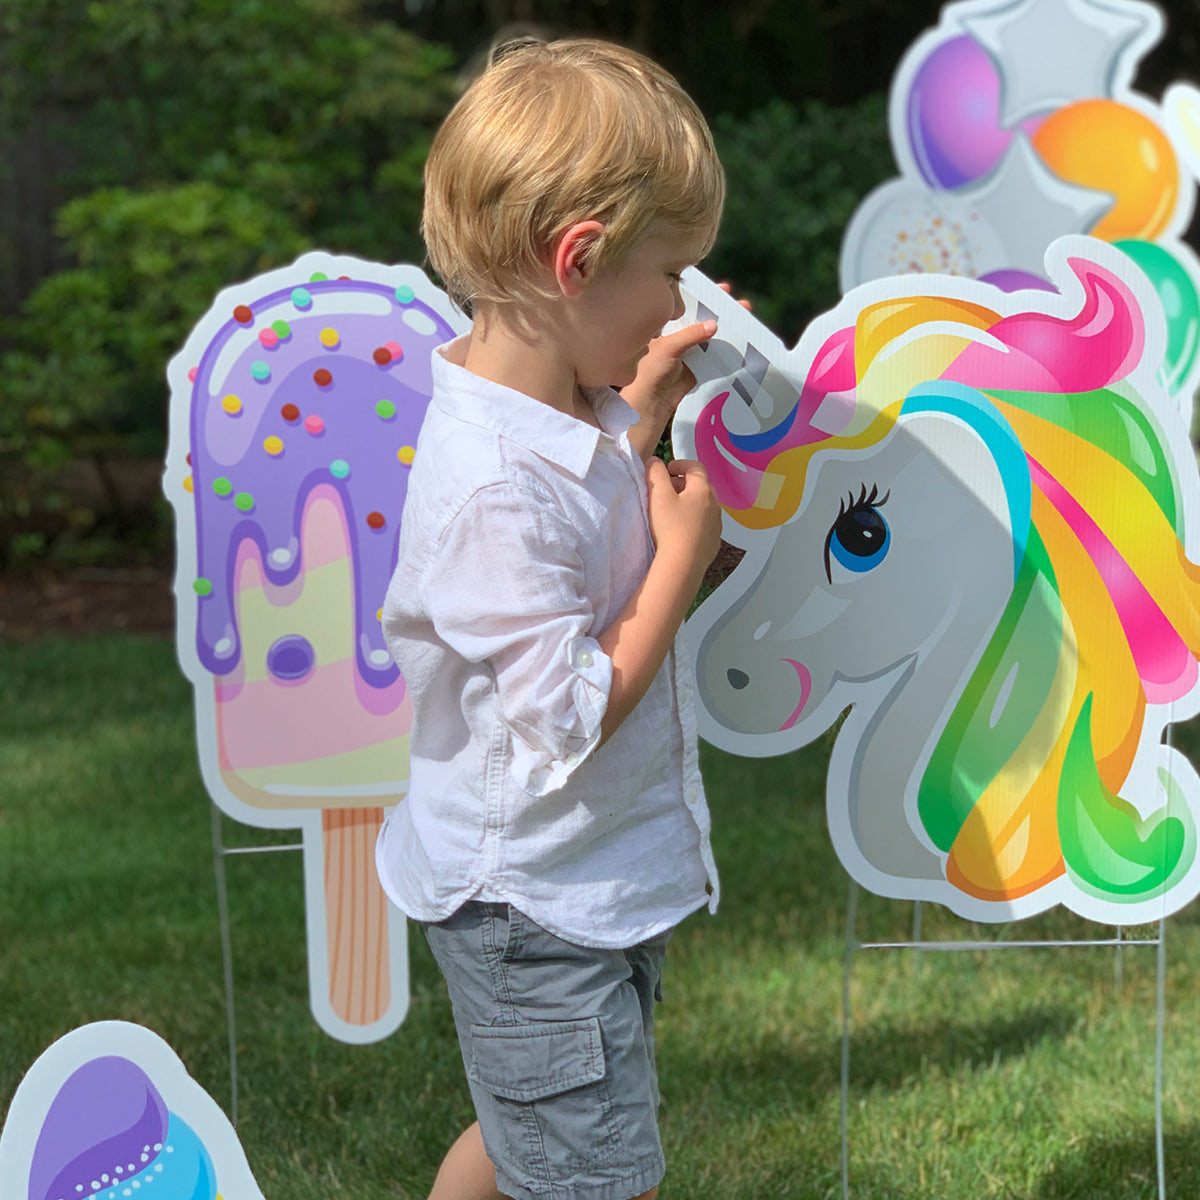 Personalized Unicorn Theme Birthday Party Decorations, Yard Card Lawn Signs With Photo Frame 0003